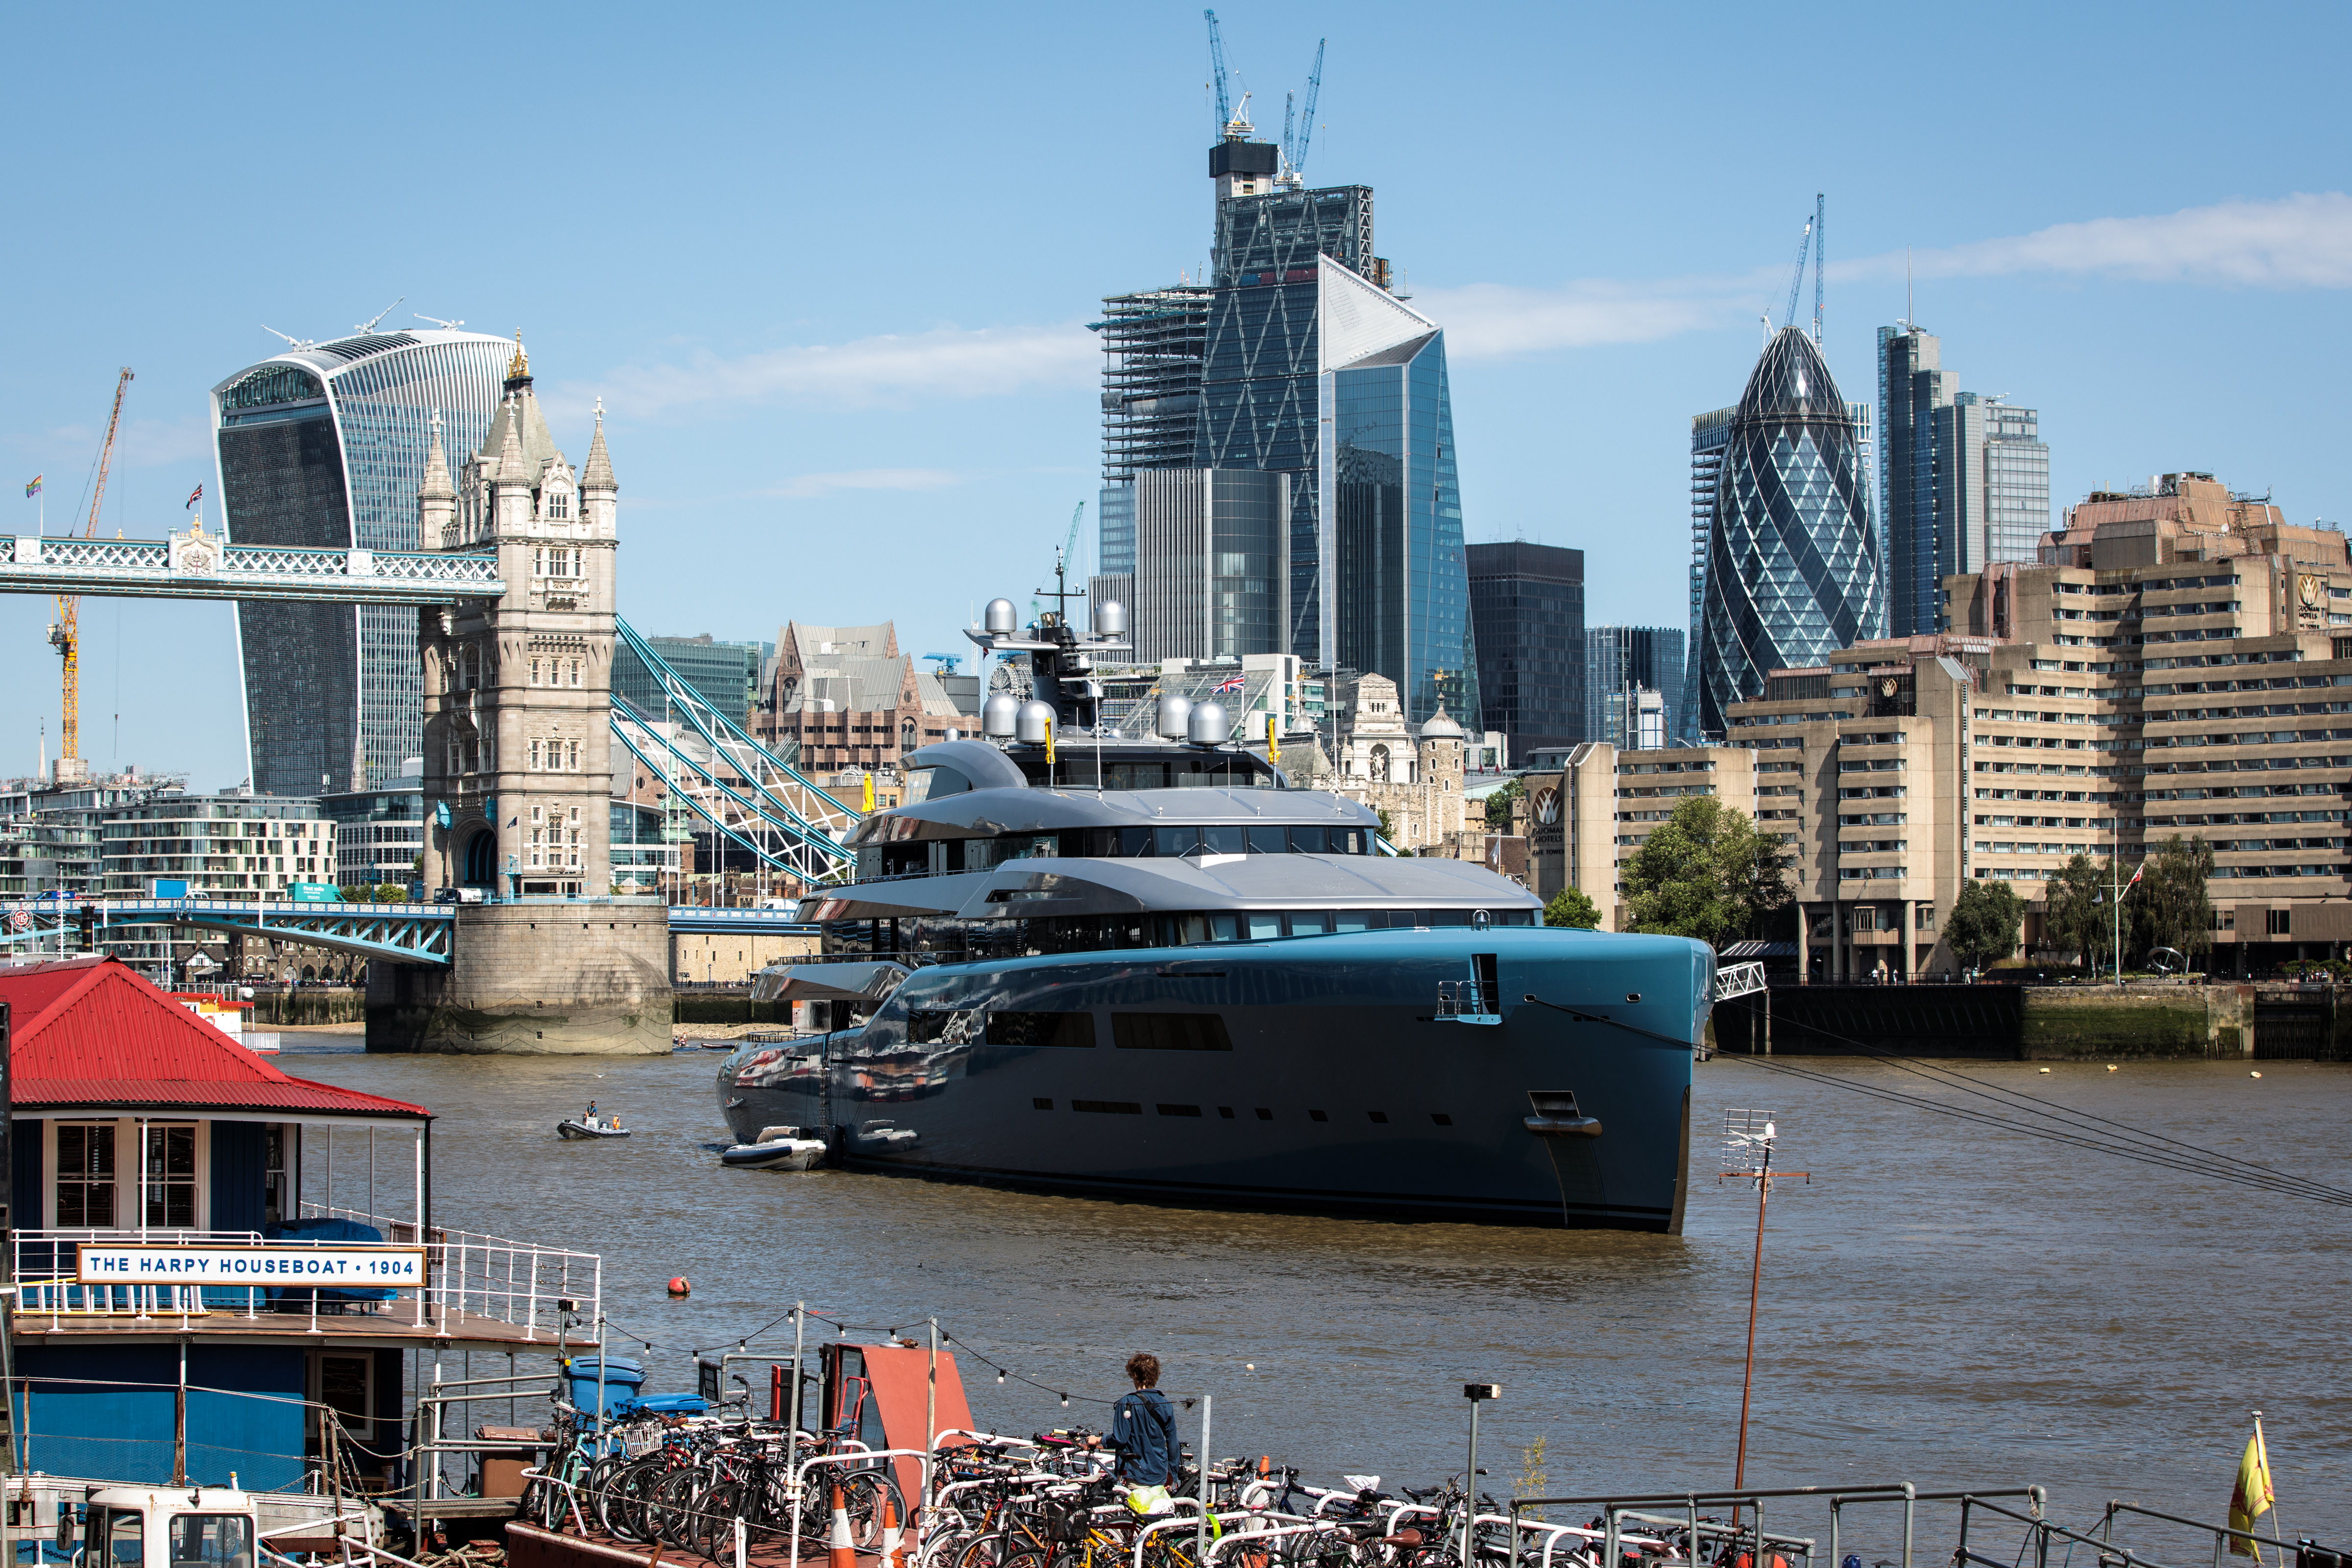 The luxury yacht pictured moored by Butler’s Wharf in London in July 2018